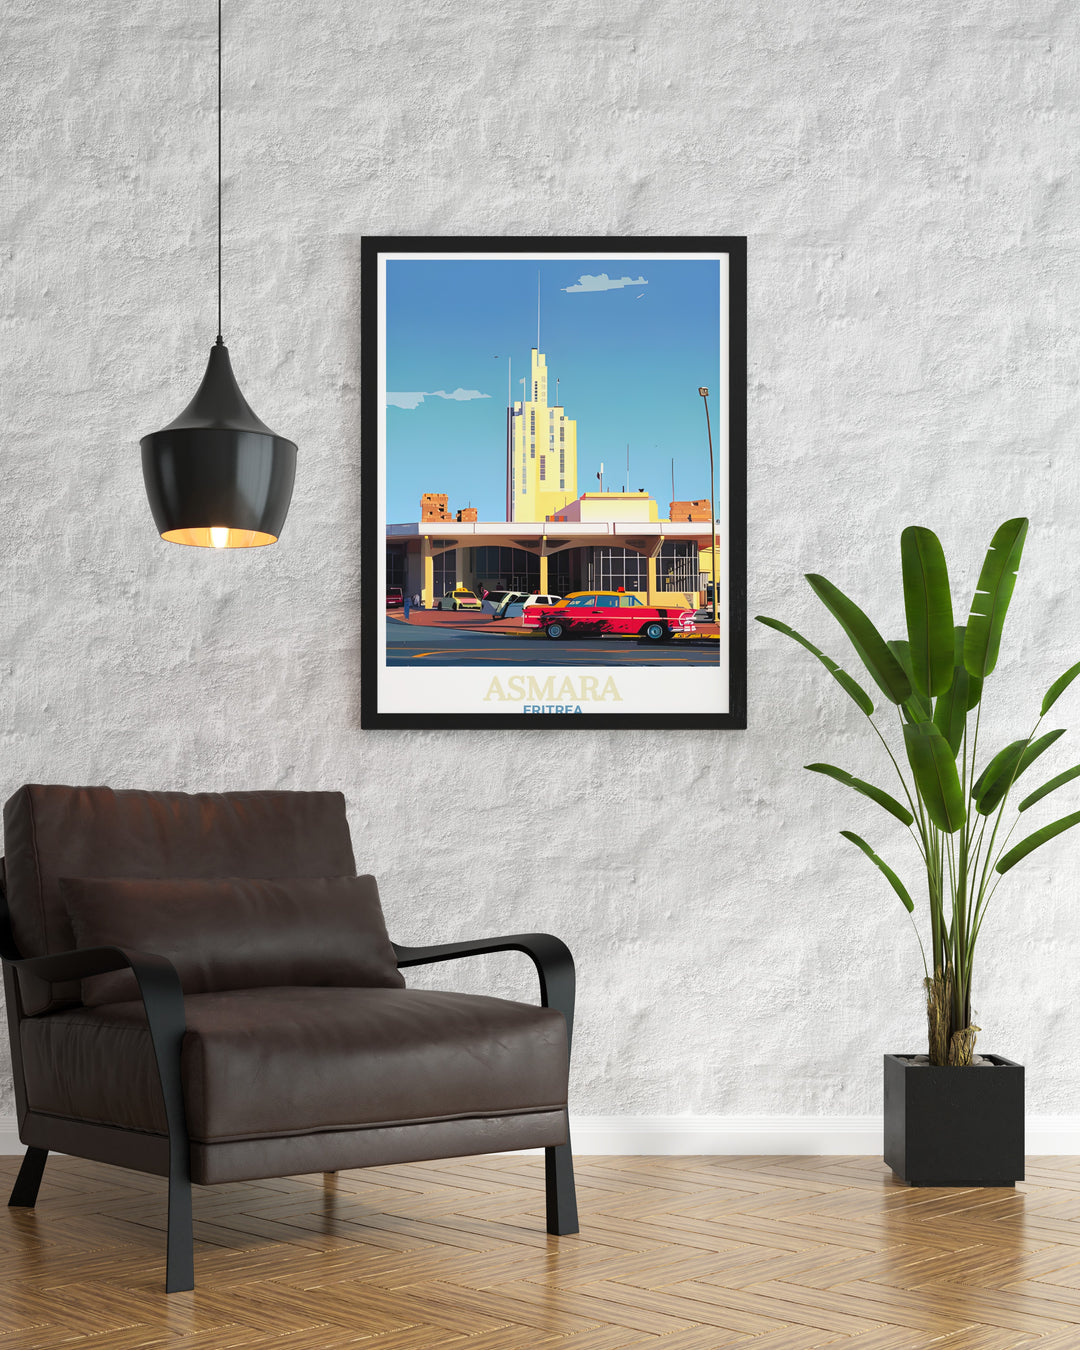 Breathtaking travel poster featuring Fiat Tagliero Building and Asmara skyline, ideal for those who appreciate architectural beauty and urban landscapes.